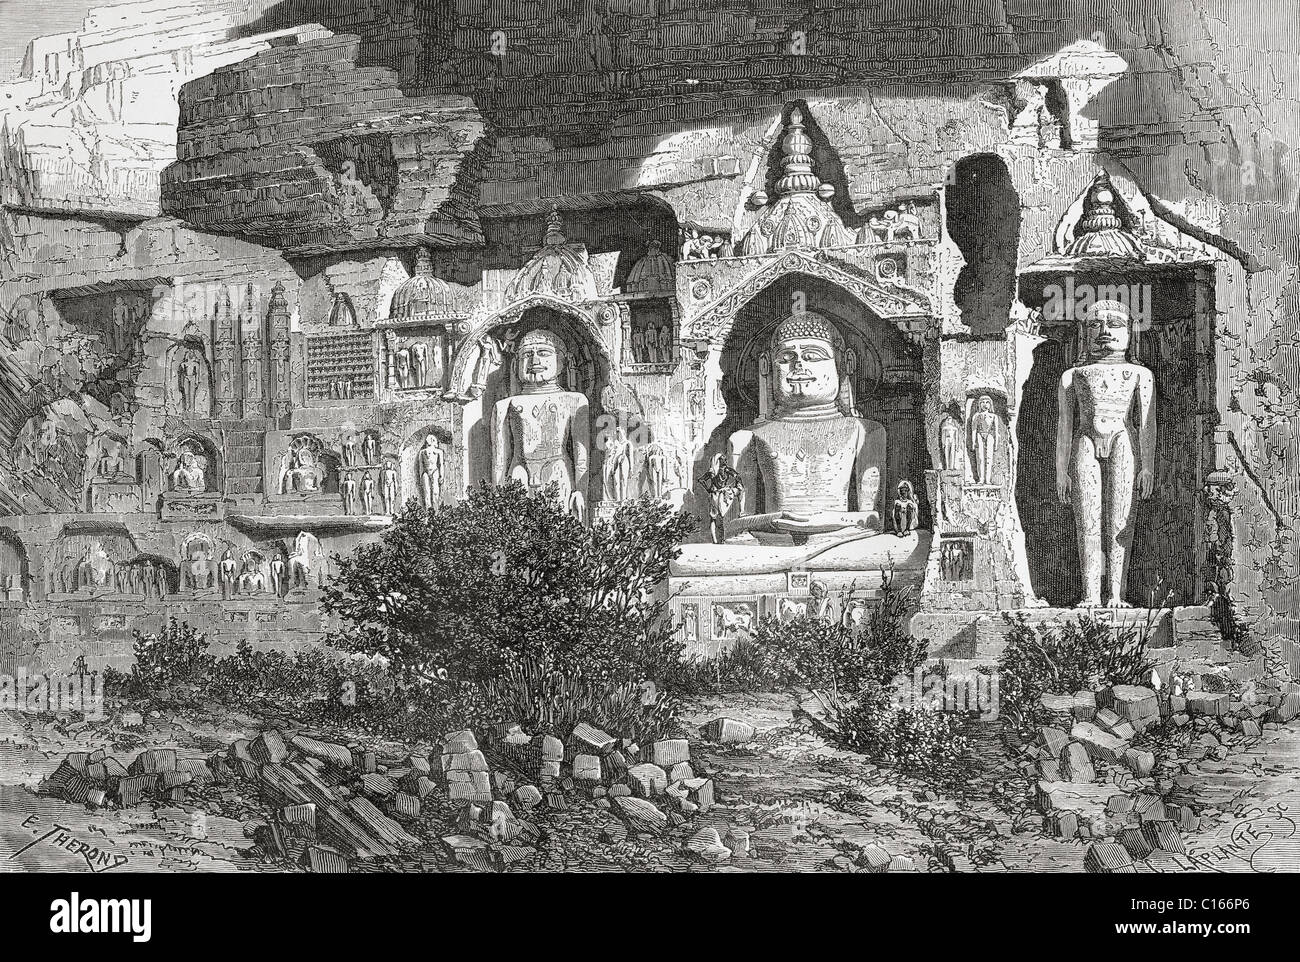 Jain Sculptures at the Gwalior Fort, Madhya Pradesh, India in the 19th century. From El Mundo en la Mano, published 1878. Stock Photo